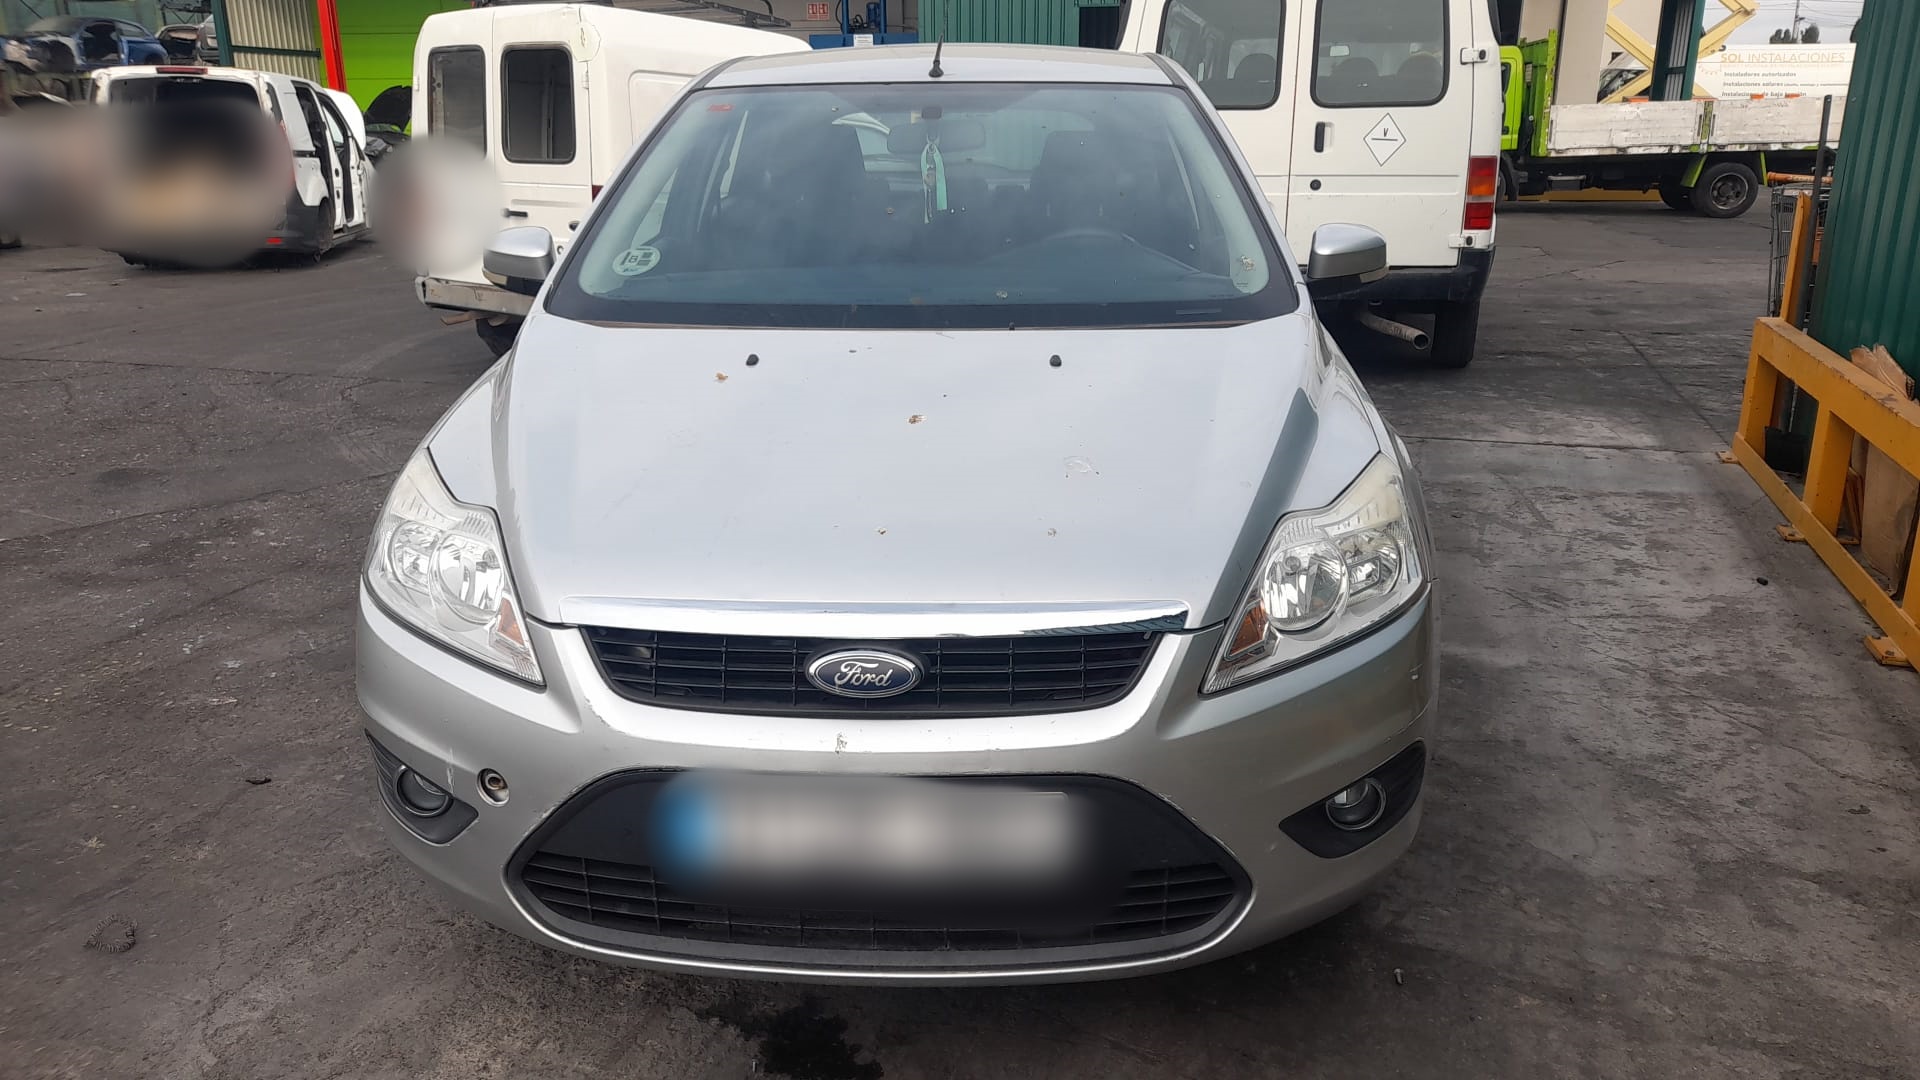 FORD Focus 2 generation (2004-2011) Капот 1521601, P8M51A16610AE 25228181